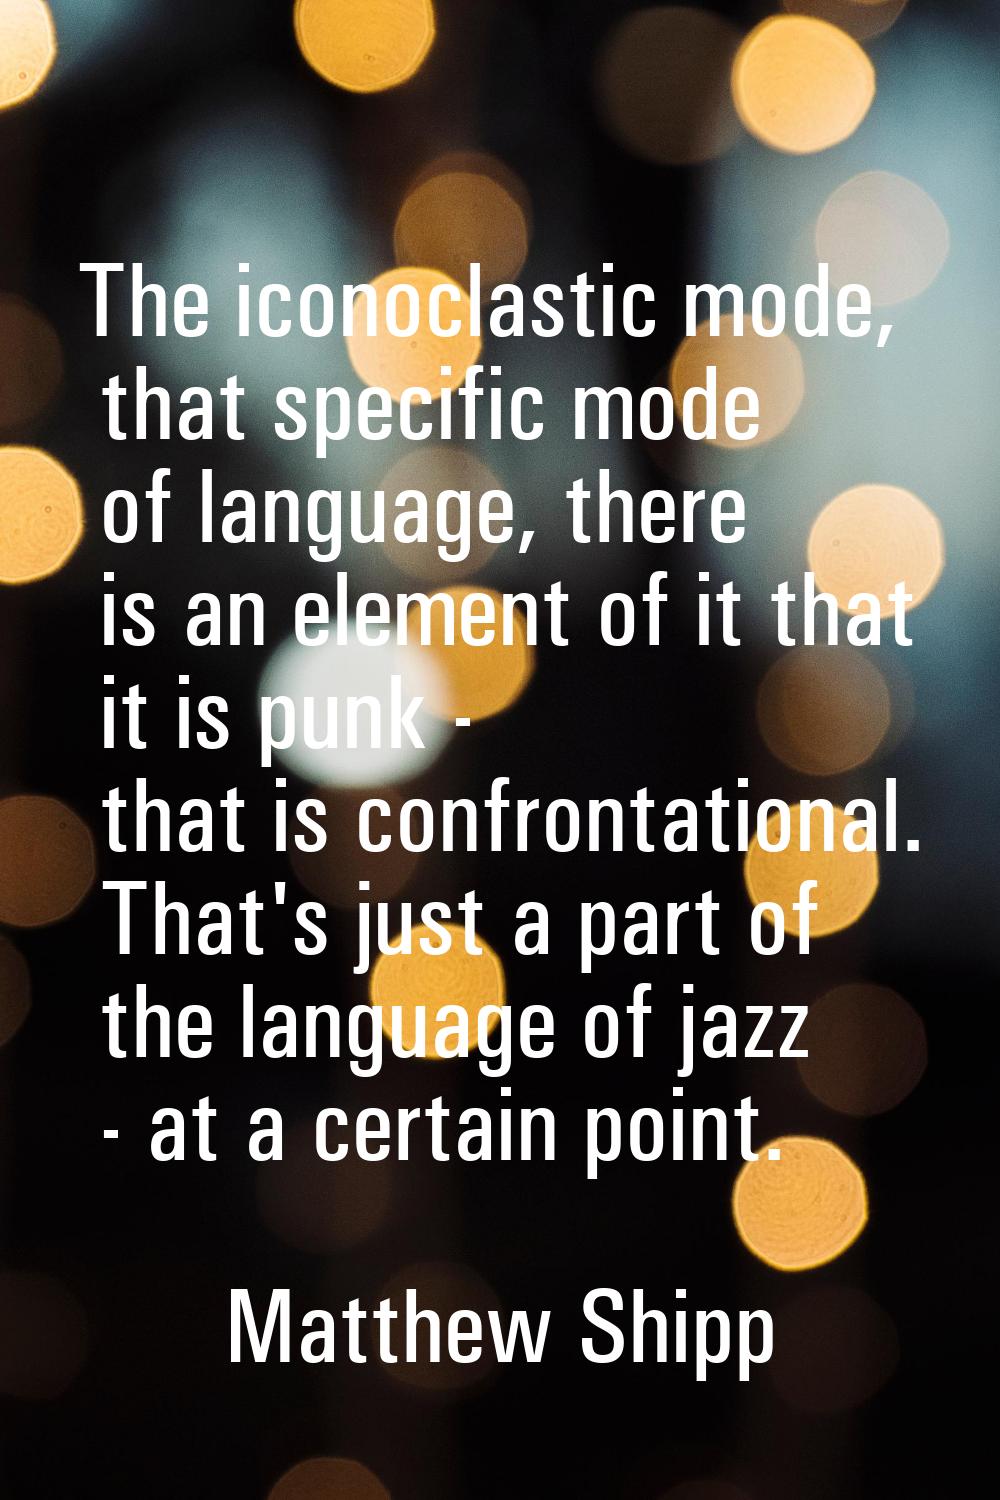 The iconoclastic mode, that specific mode of language, there is an element of it that it is punk - 